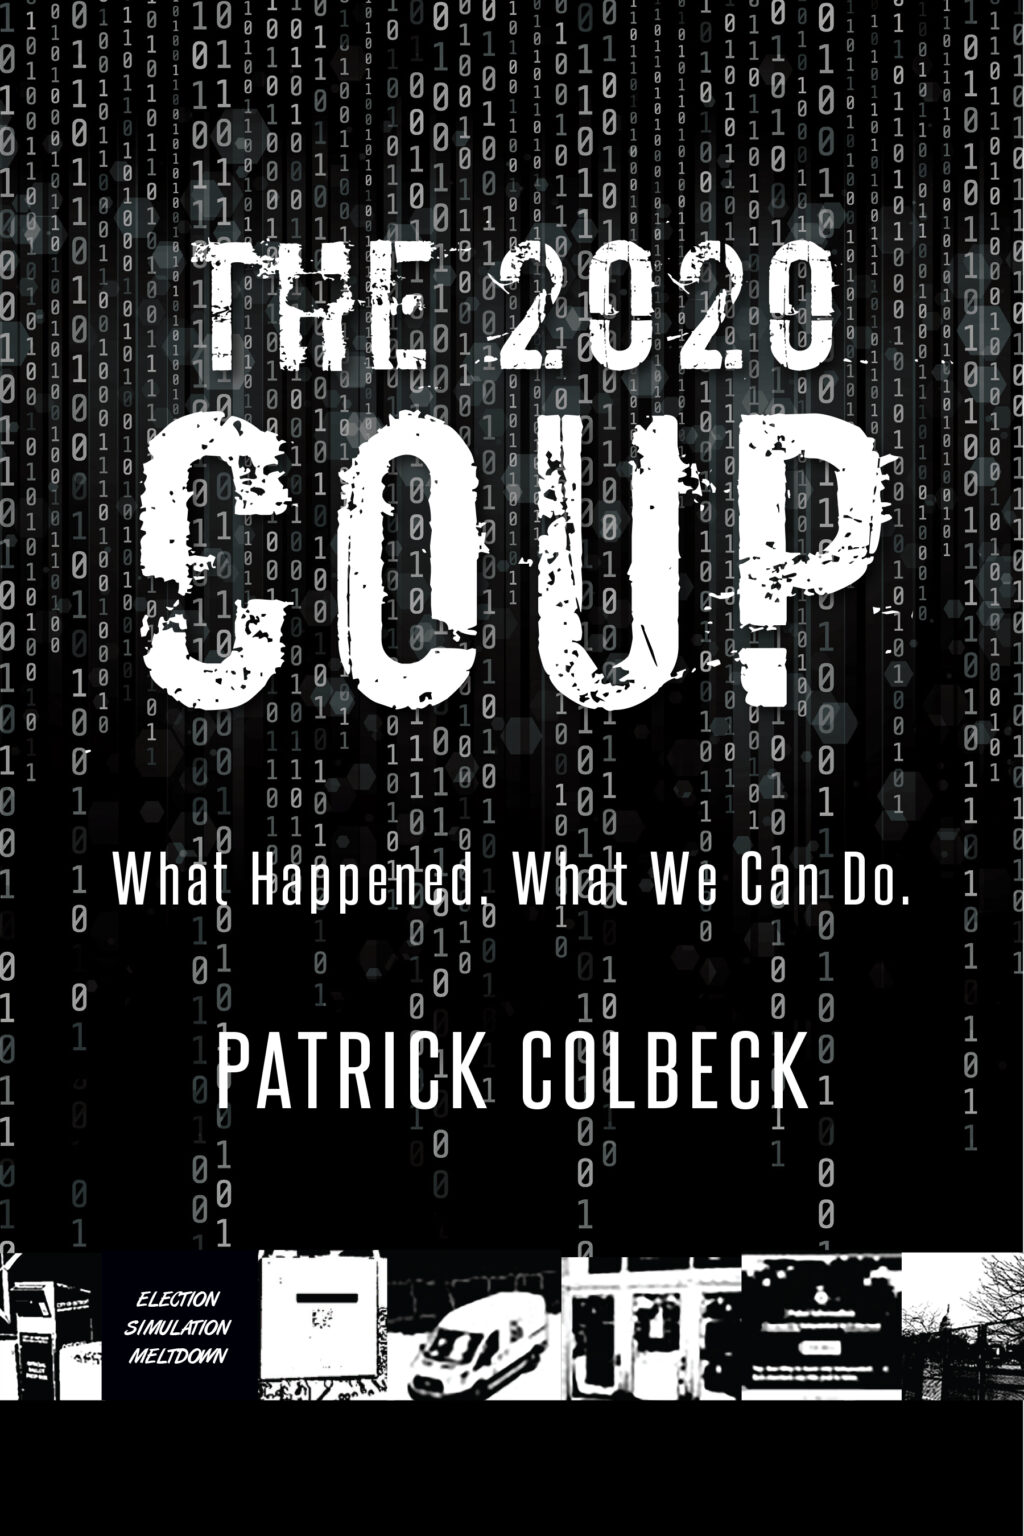 The 2020 Coup